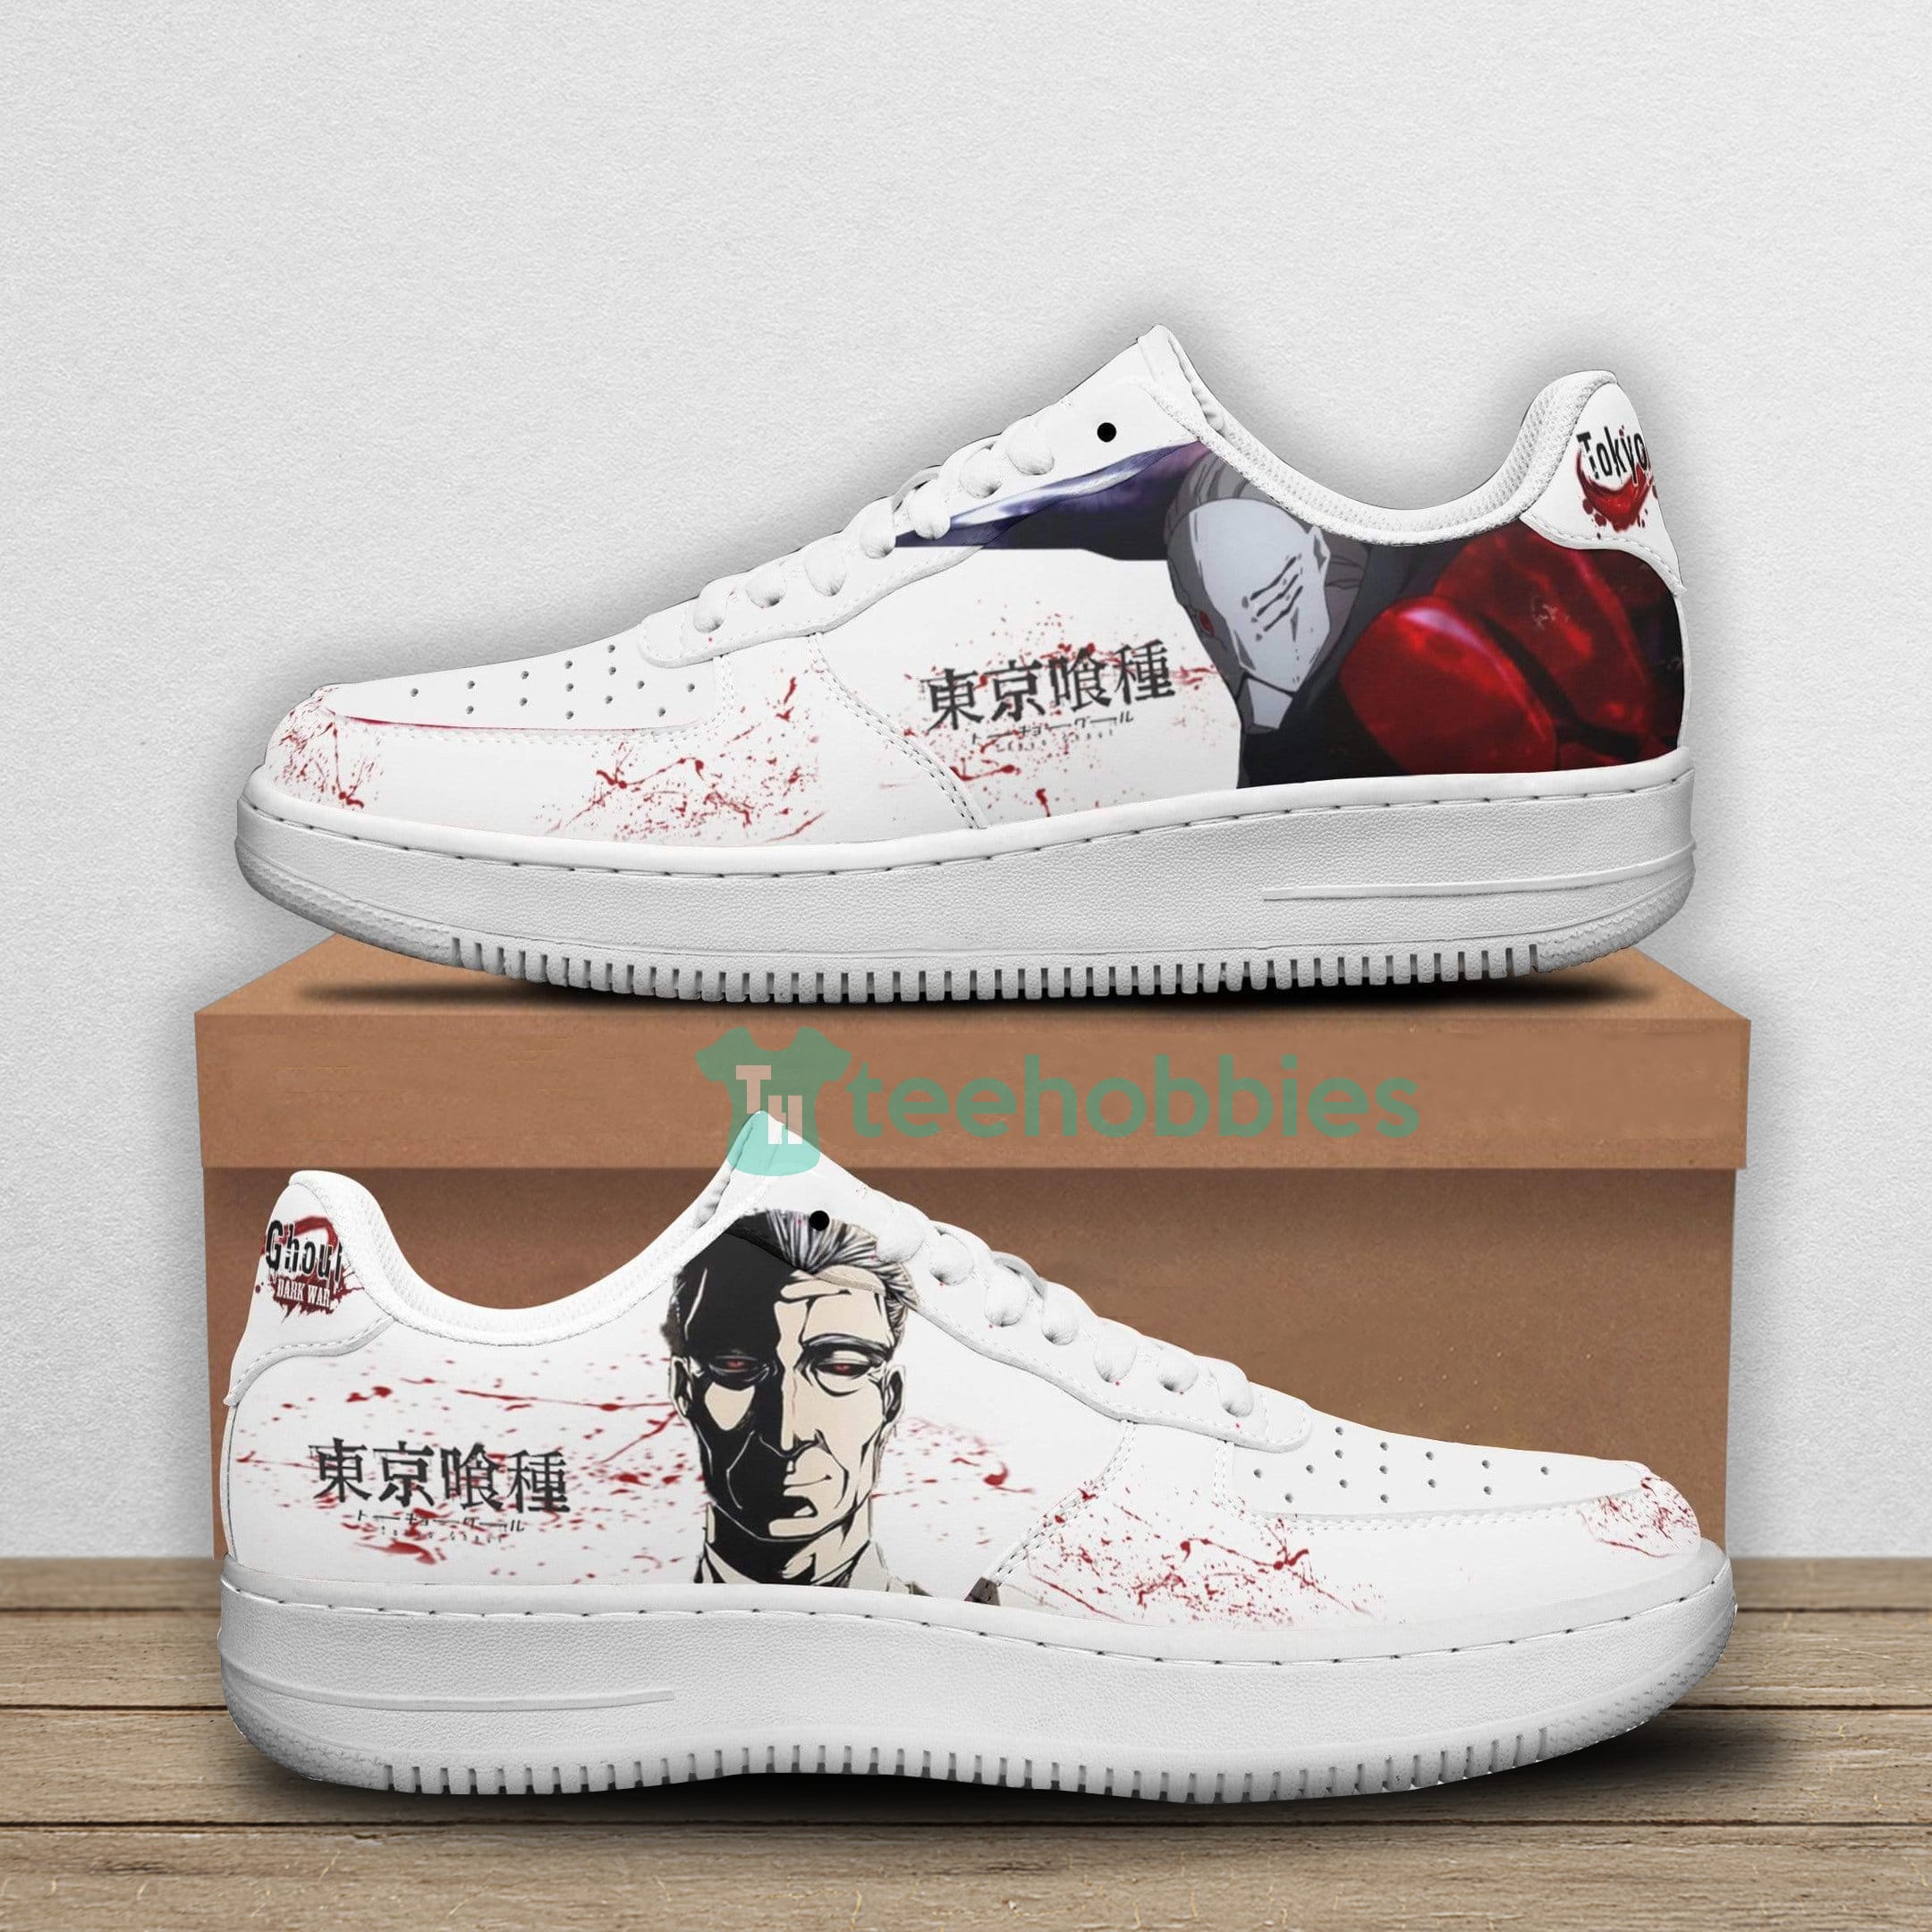 Yoshimura Custom Tokyo Ghoul Anime Fans Air Force Shoes